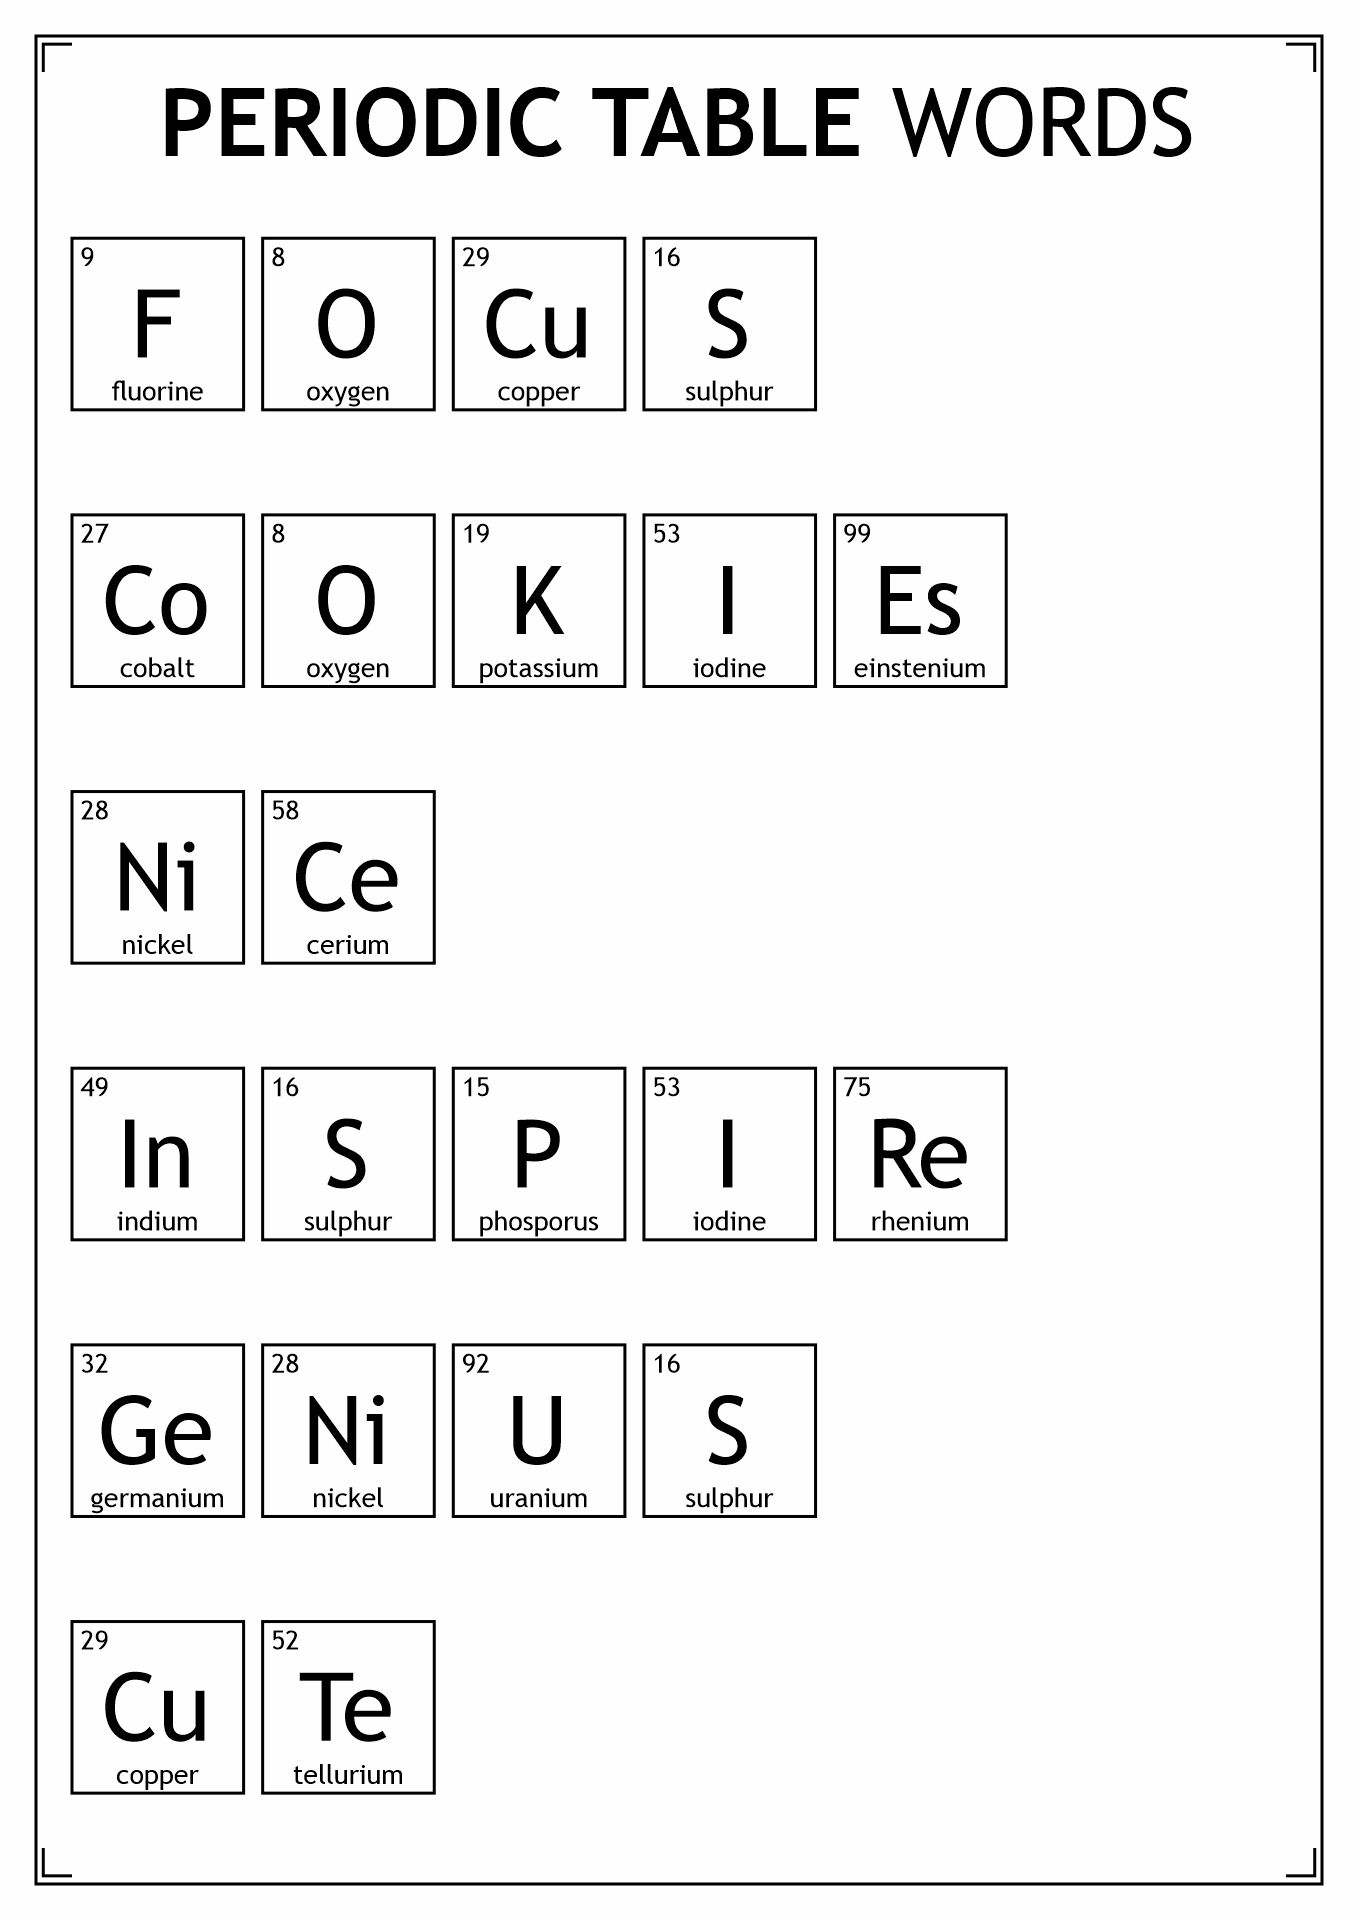 Periodic Table Words Image